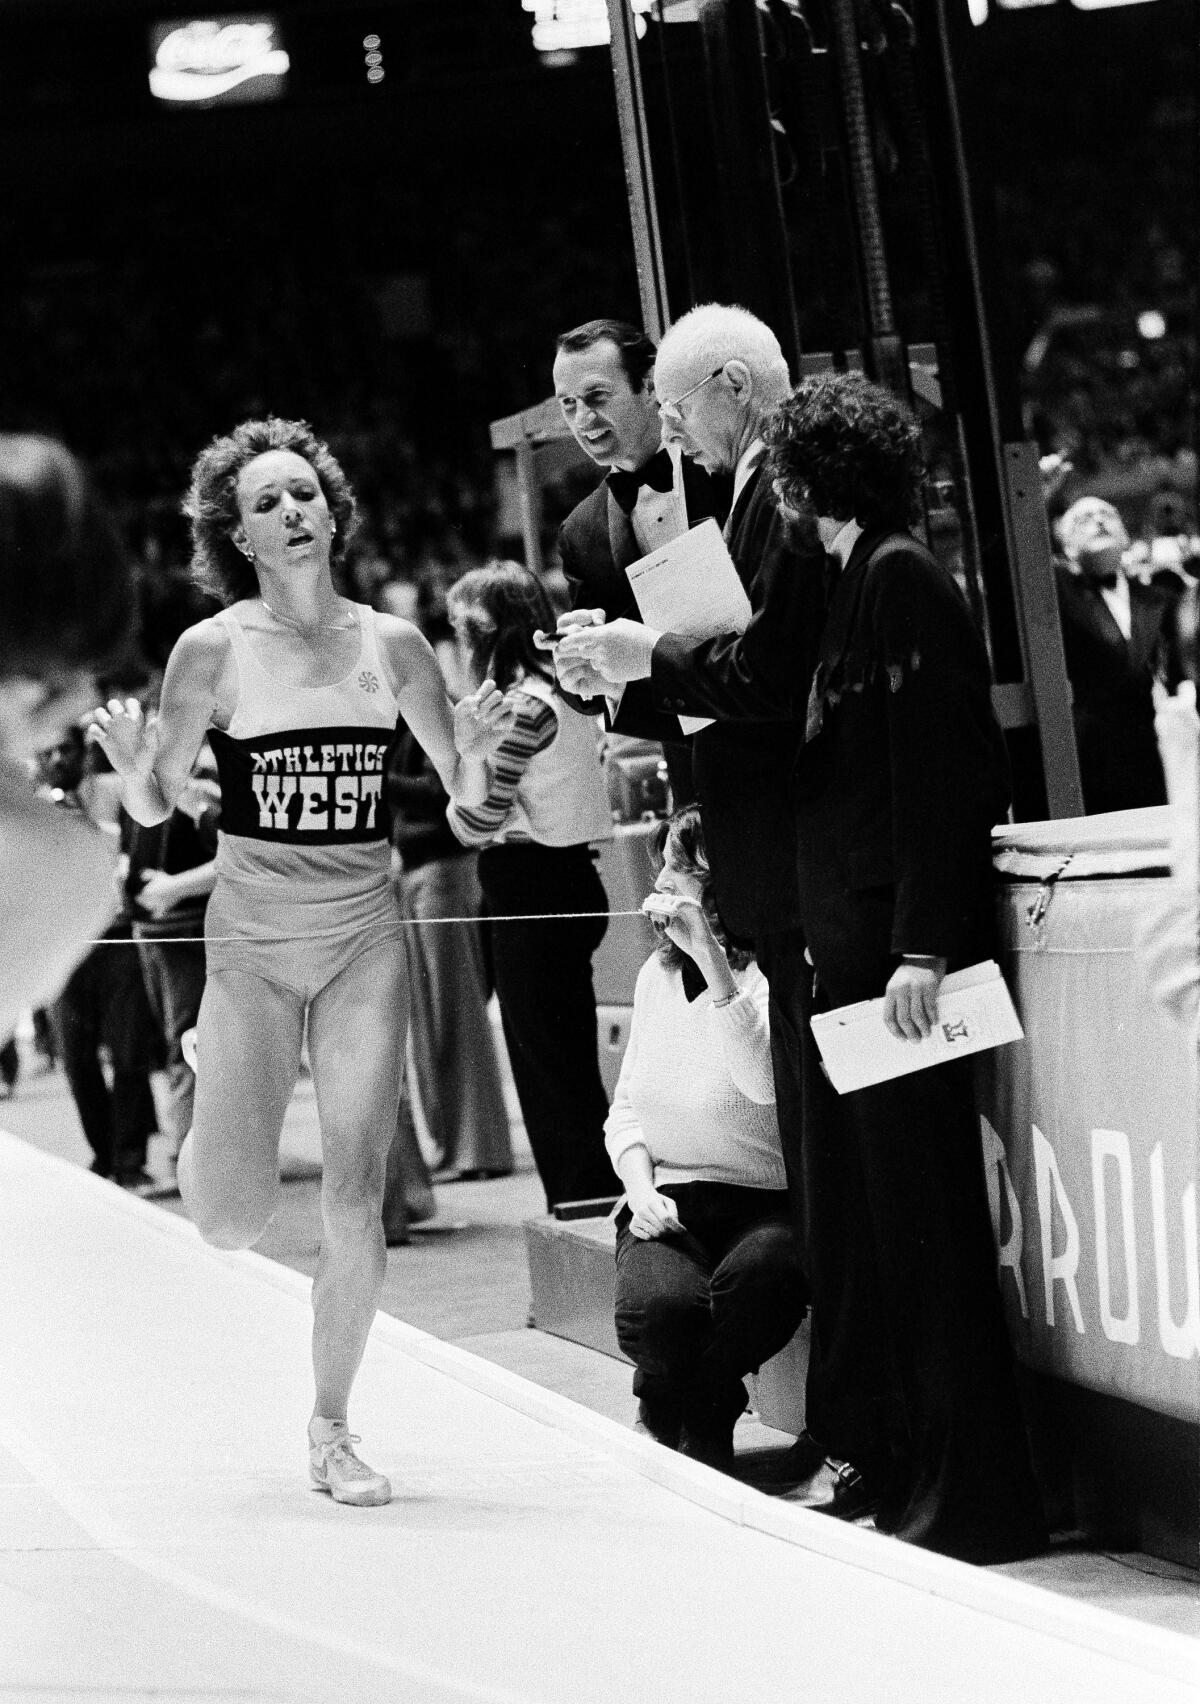 Mary Decker crosses the finish line at the Millrose Games in New York to win the women's 1,500 meters on Feb. 9, 1980.